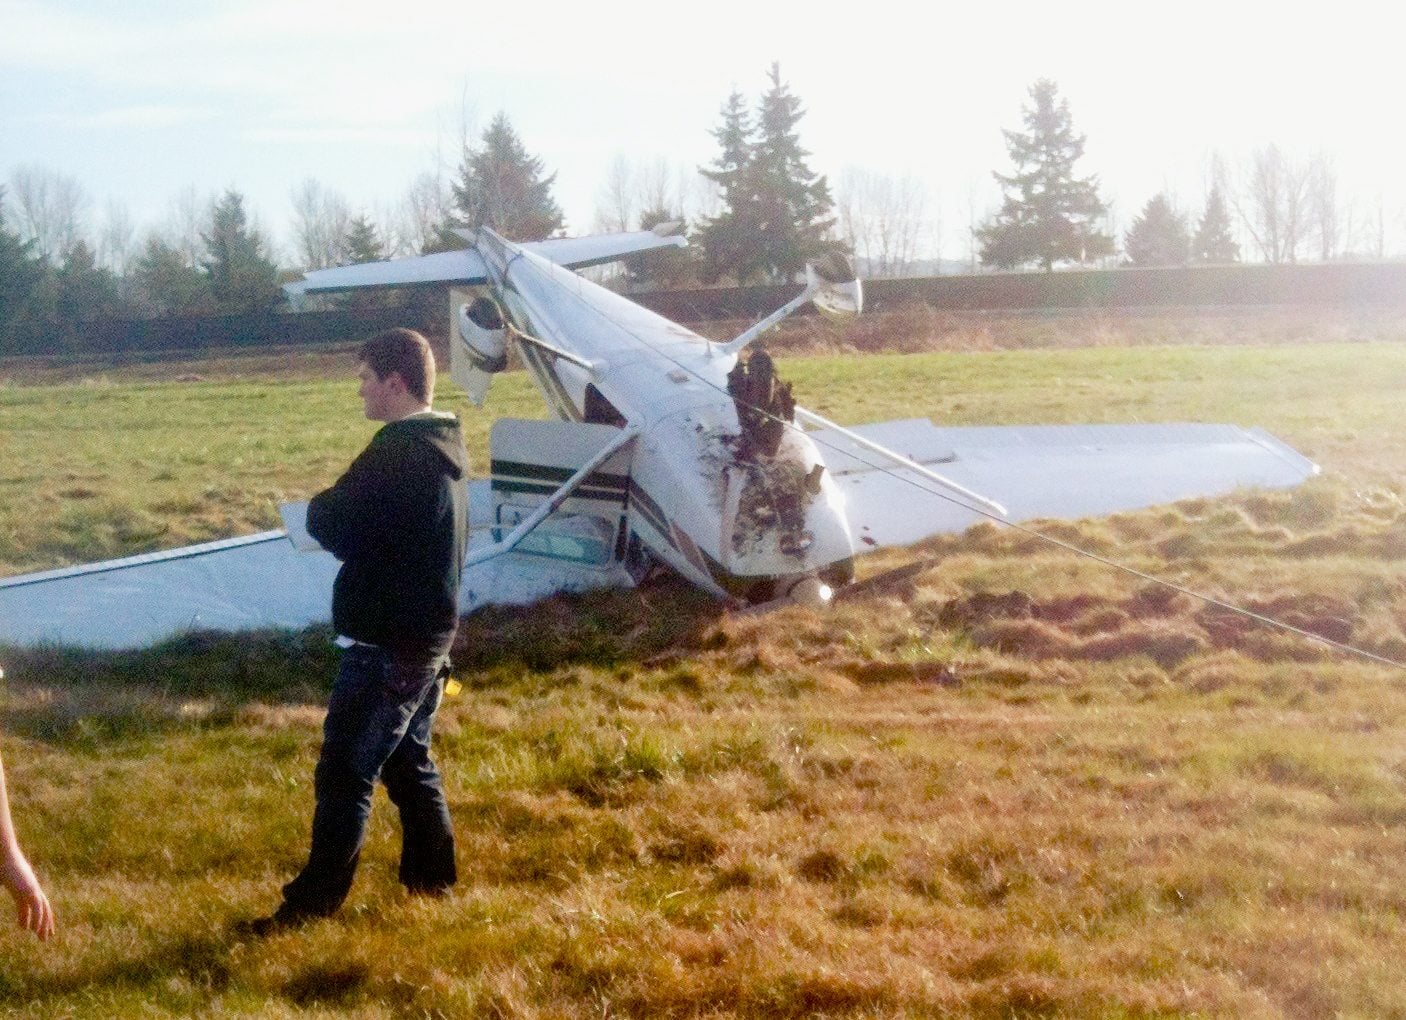 Cowlitz 2 Fire and Rescue
A Woodland man was unhurt when his plane was flipped by a crosswind while landing at an airport in Kelso.